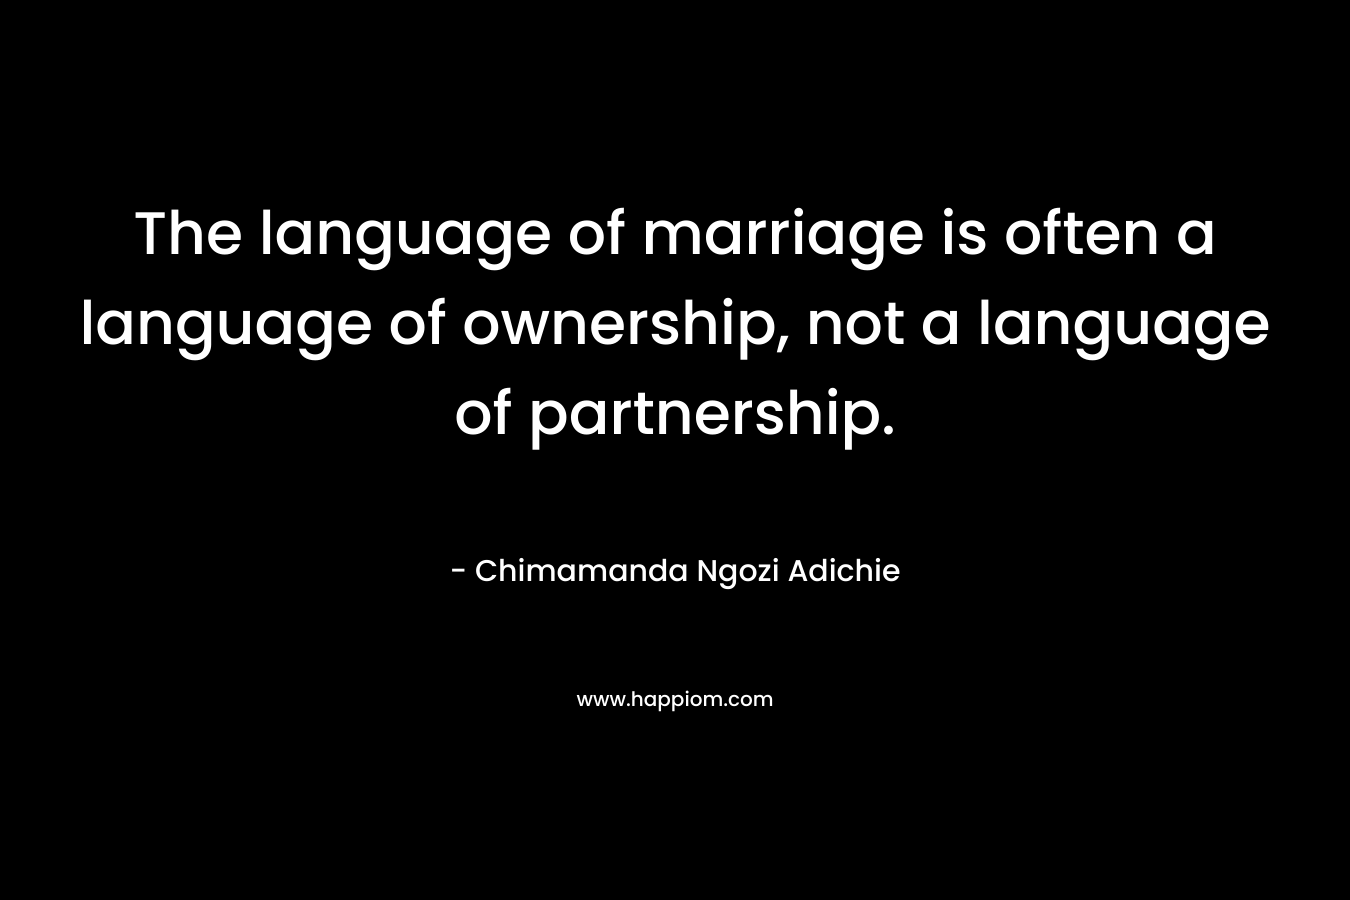 The language of marriage is often a language of ownership, not a language of partnership.